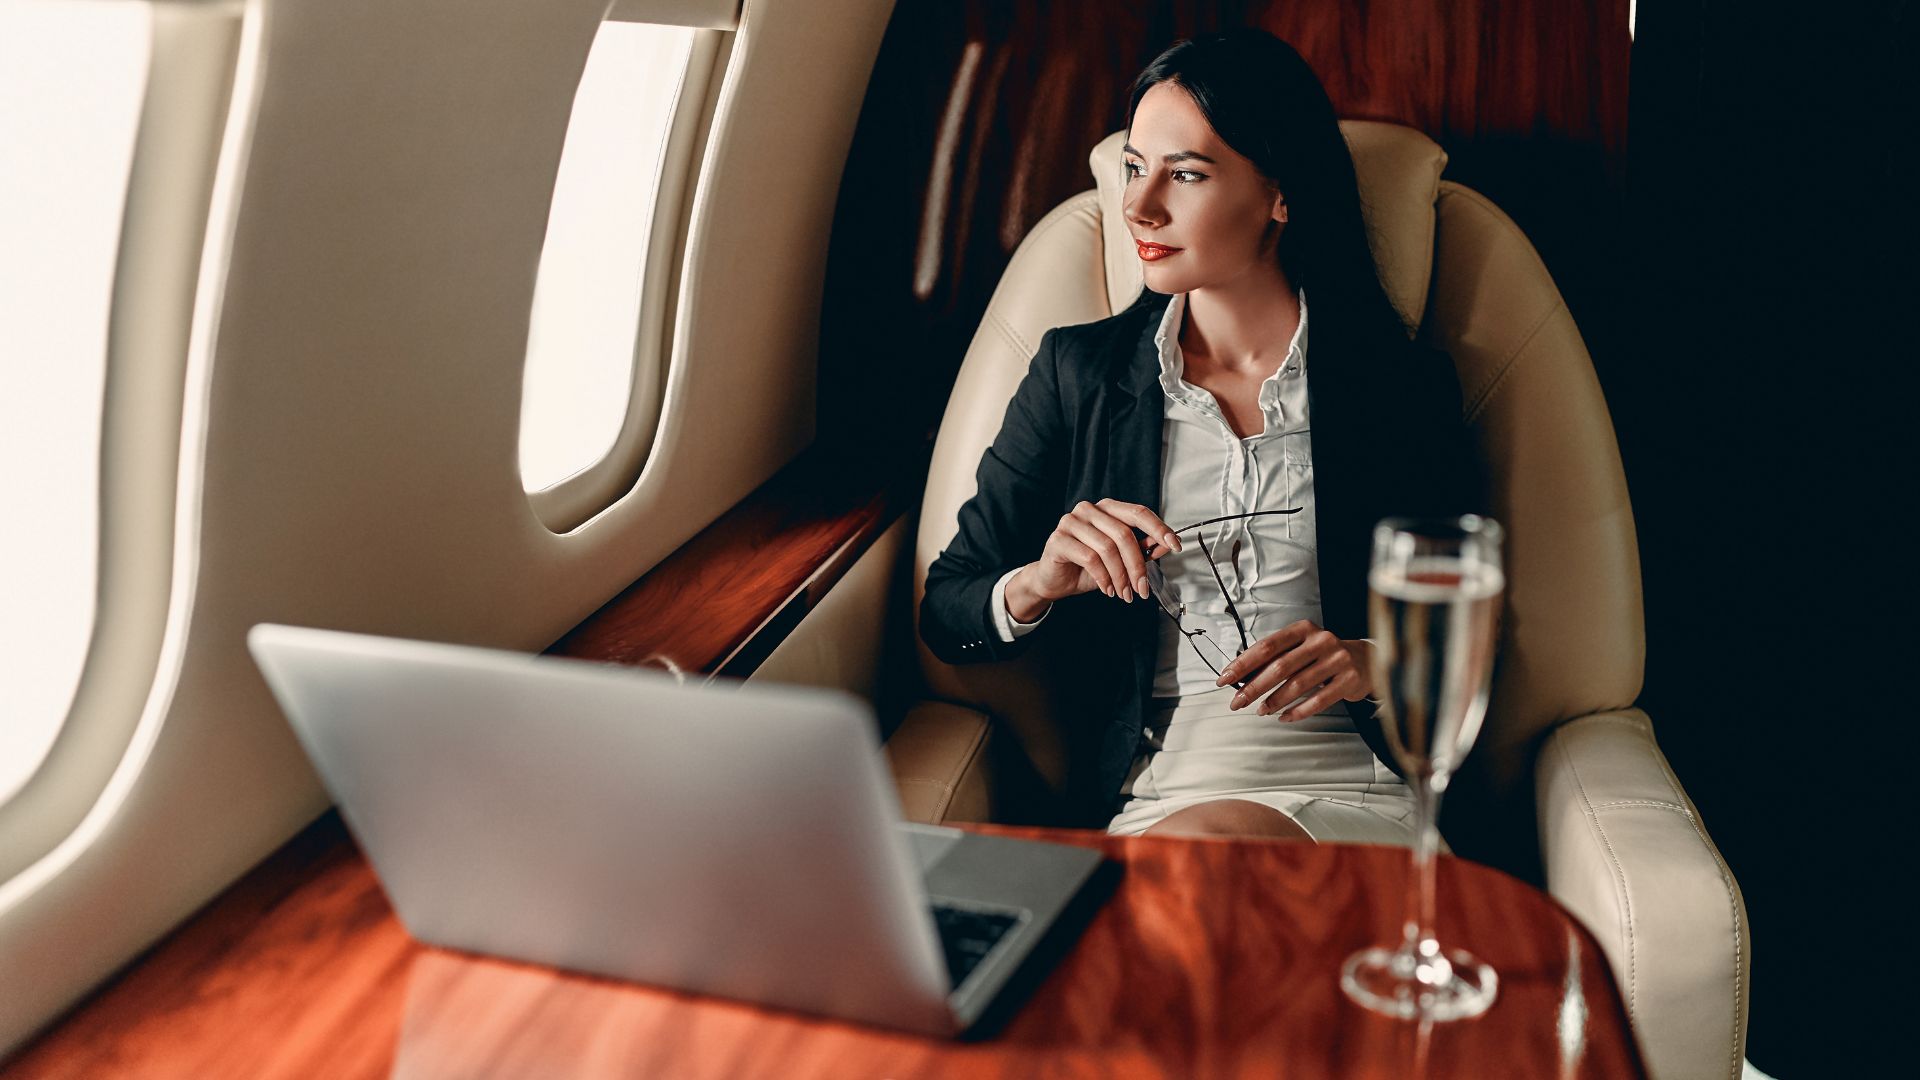 Private Jet Etiquette: Do's and Don'ts While Onboard